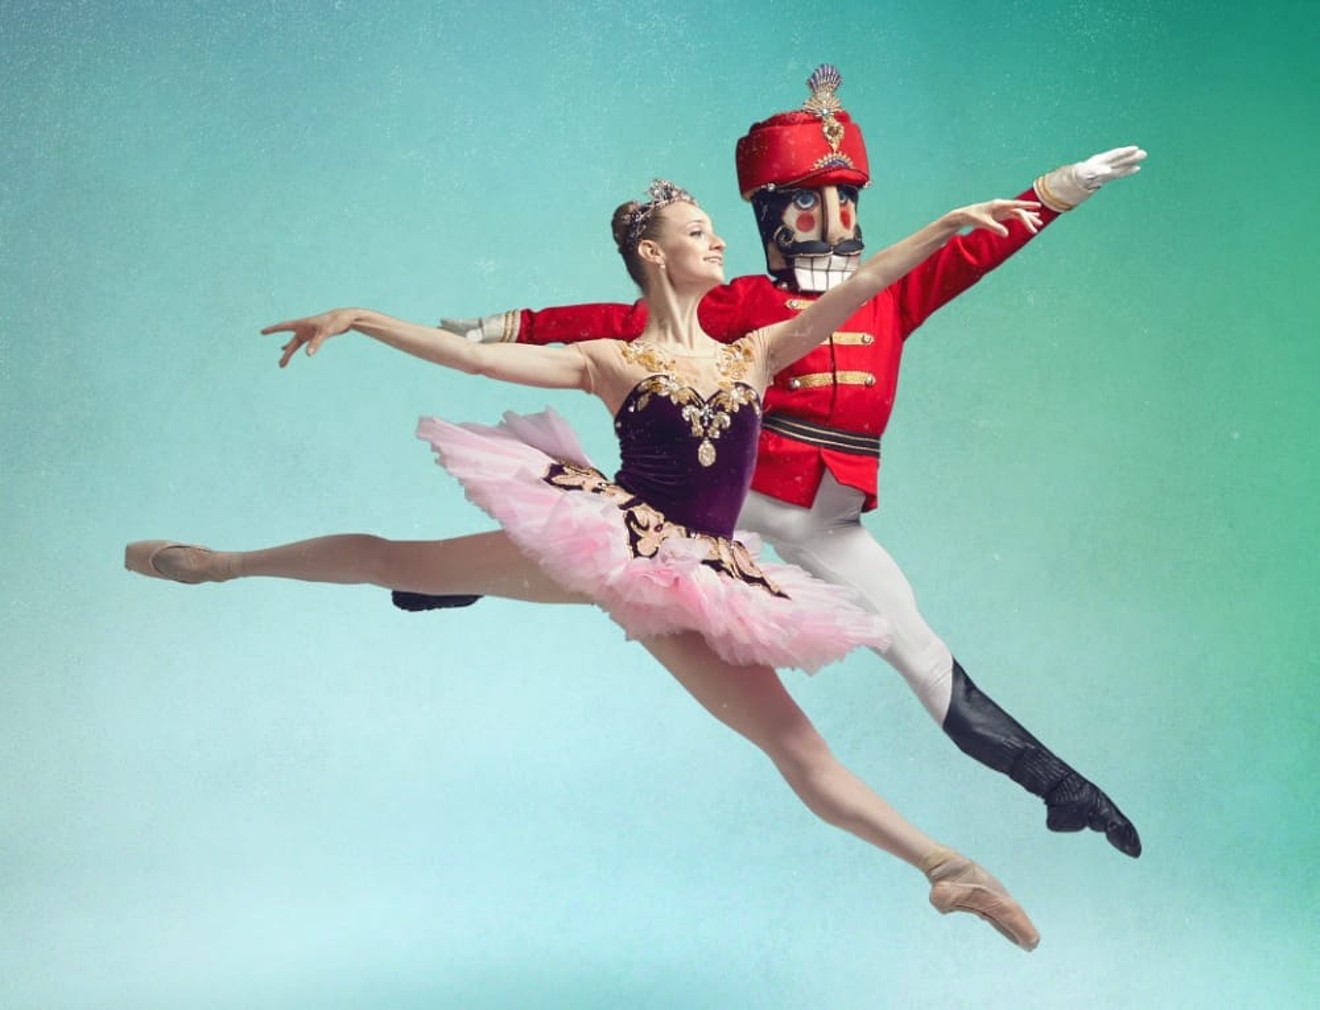 Nicole Von Enck and Brett Young bring fairy tale dreams to life for Nutcracker fans.